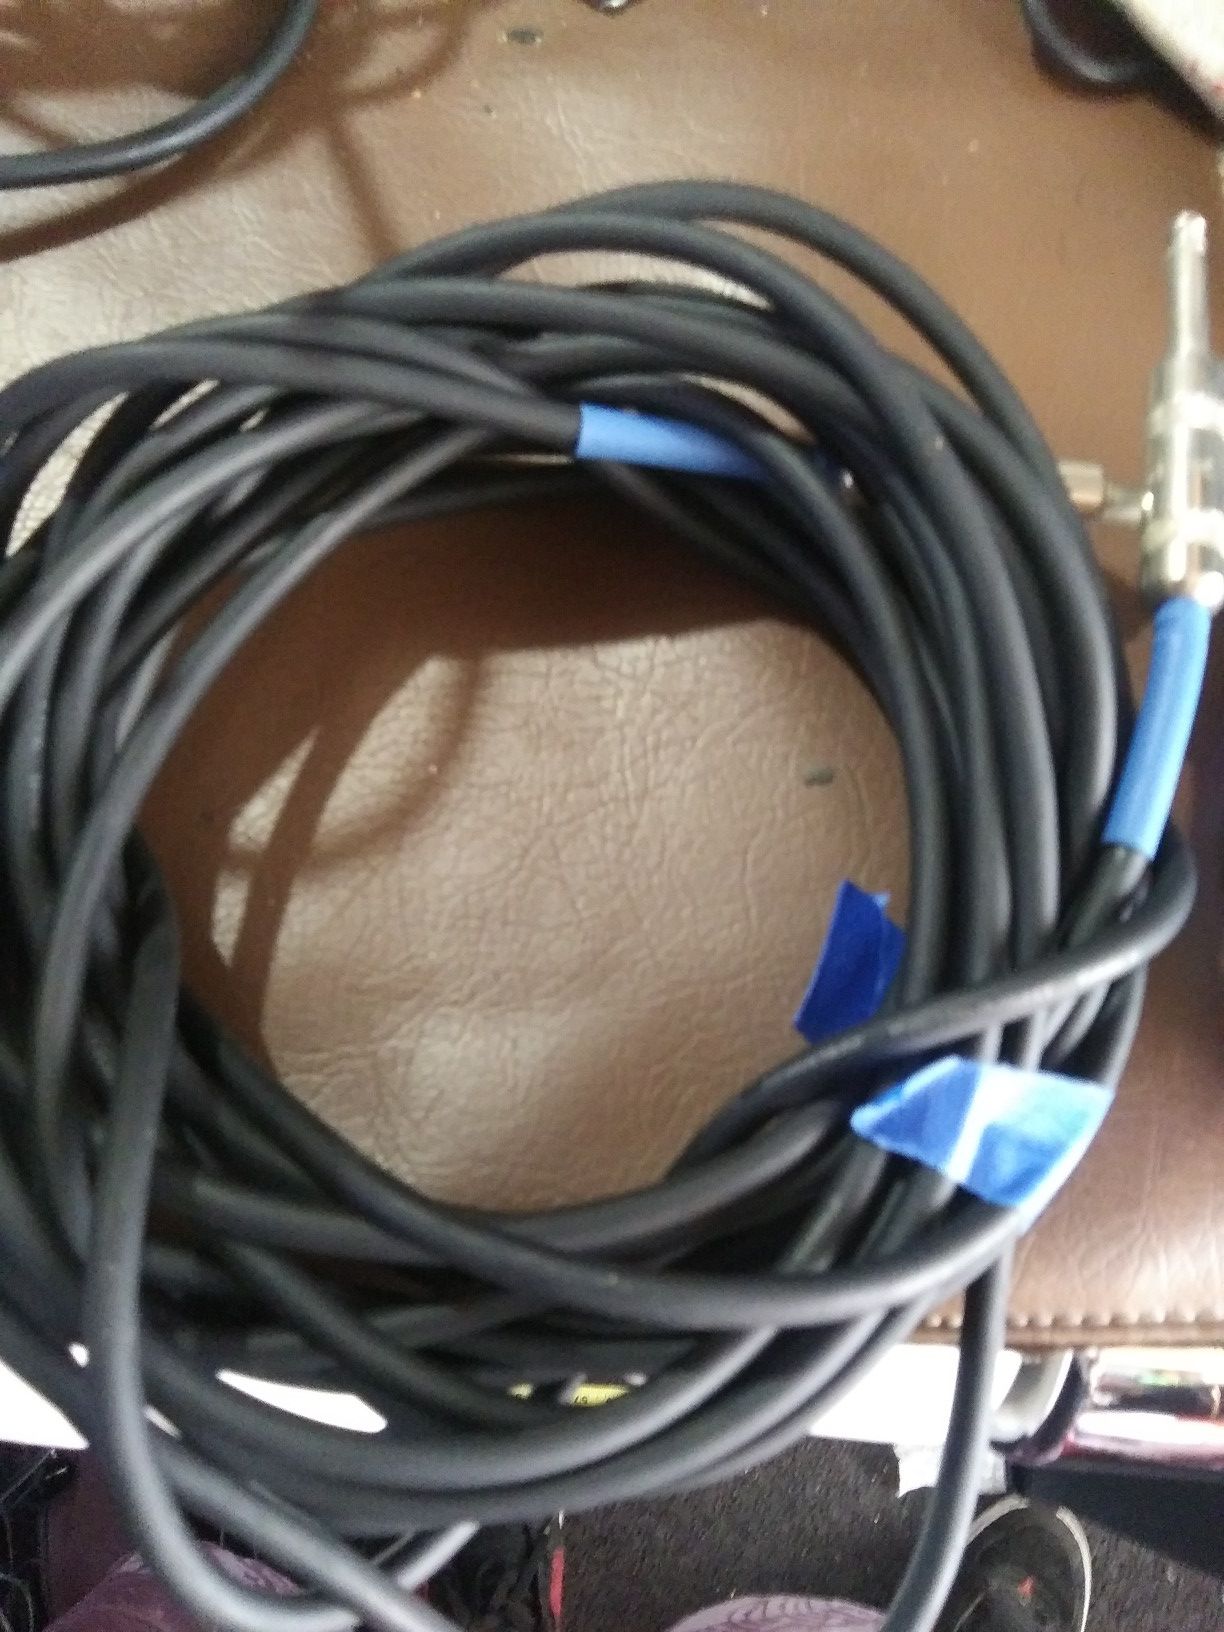 1/4" Instrument Cable